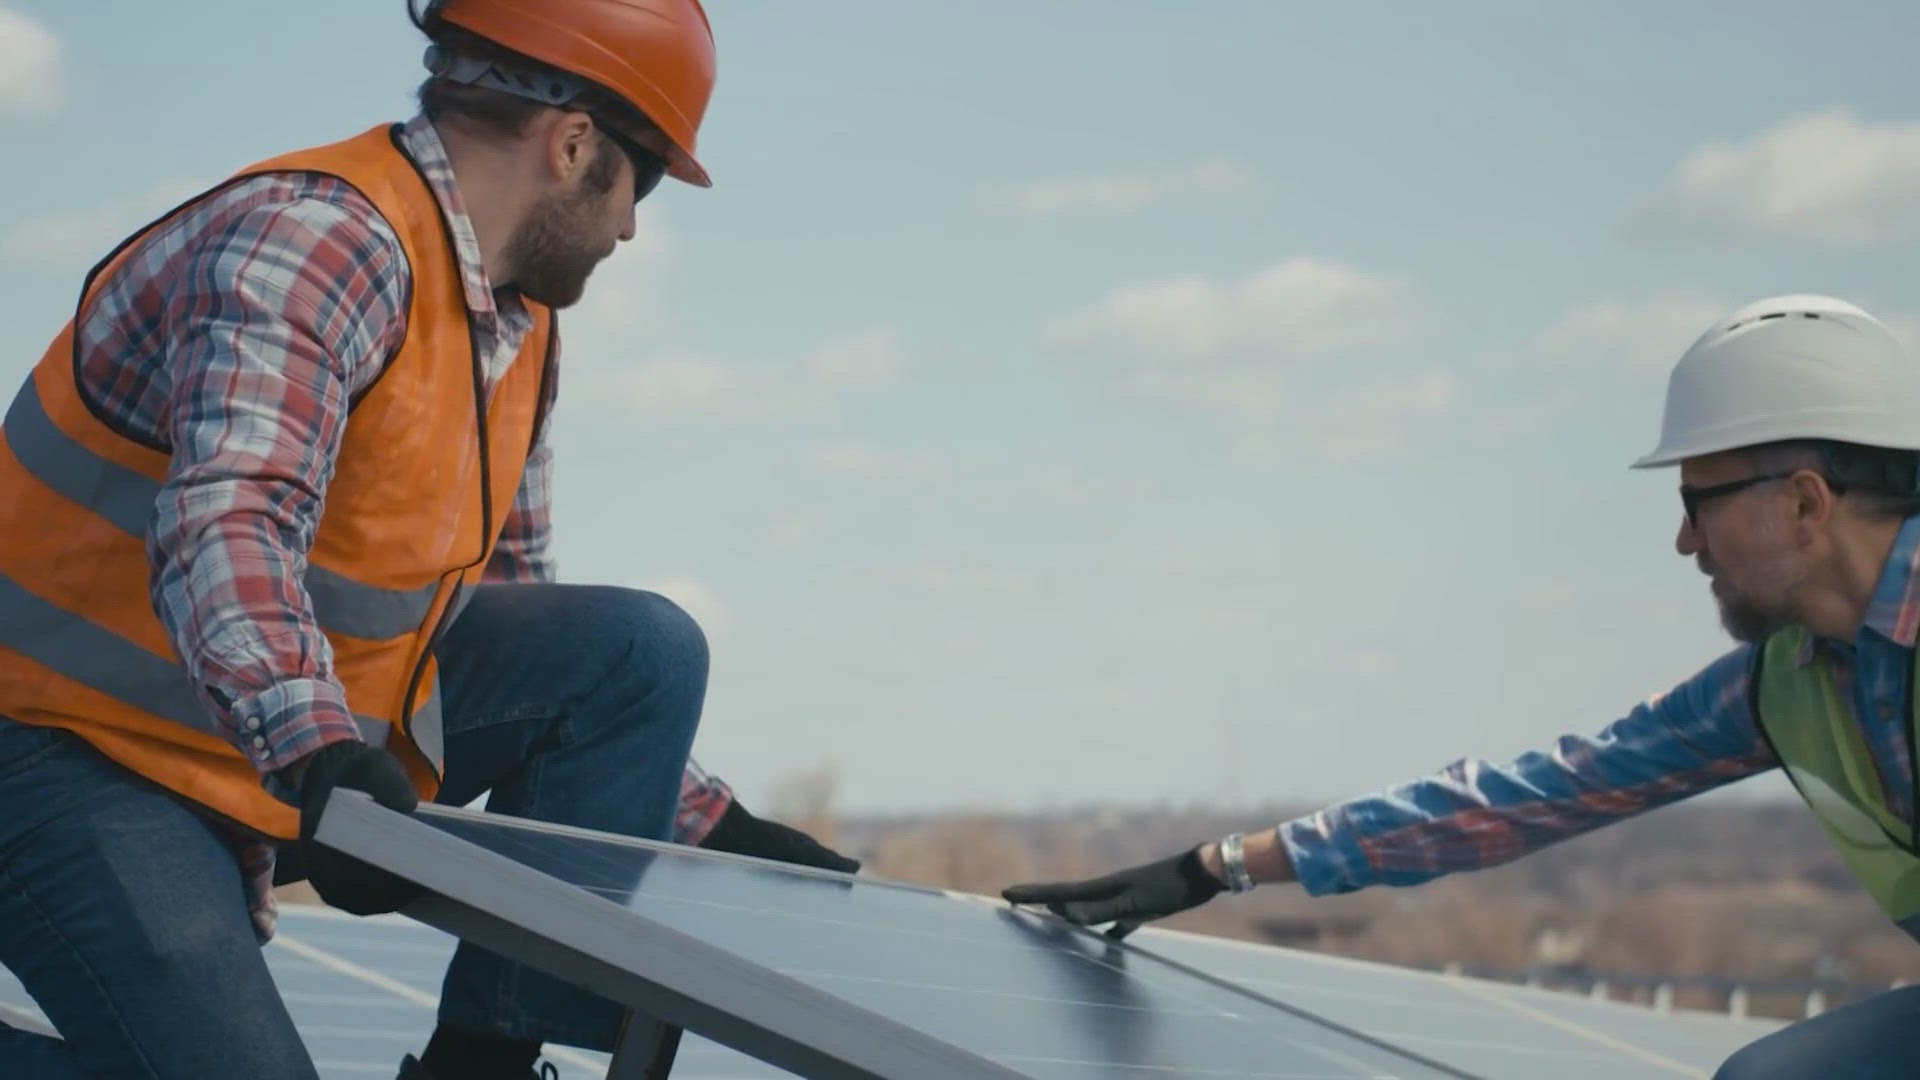 New data shows there are over 274,000 solar installations in Texas. The industry has added thousands of jobs and nearly $28 billion into the state's economy.